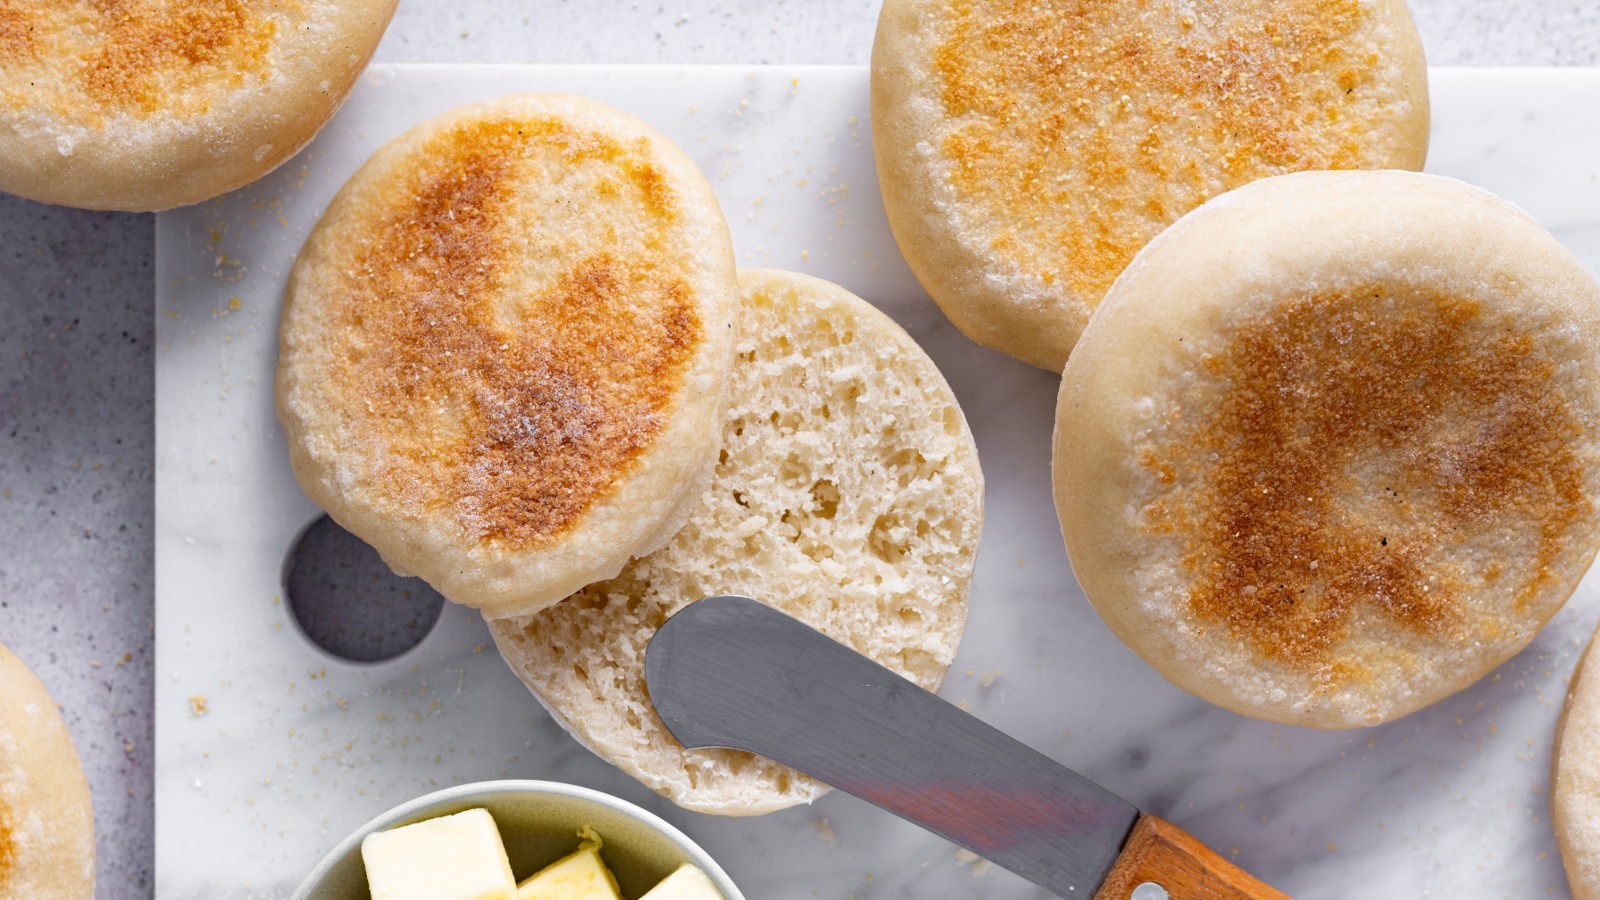 https://www.tastingtable.com/img/gallery/the-simple-hack-for-a-perfectly-split-english-muffin/l-intro-1695254512.jpg